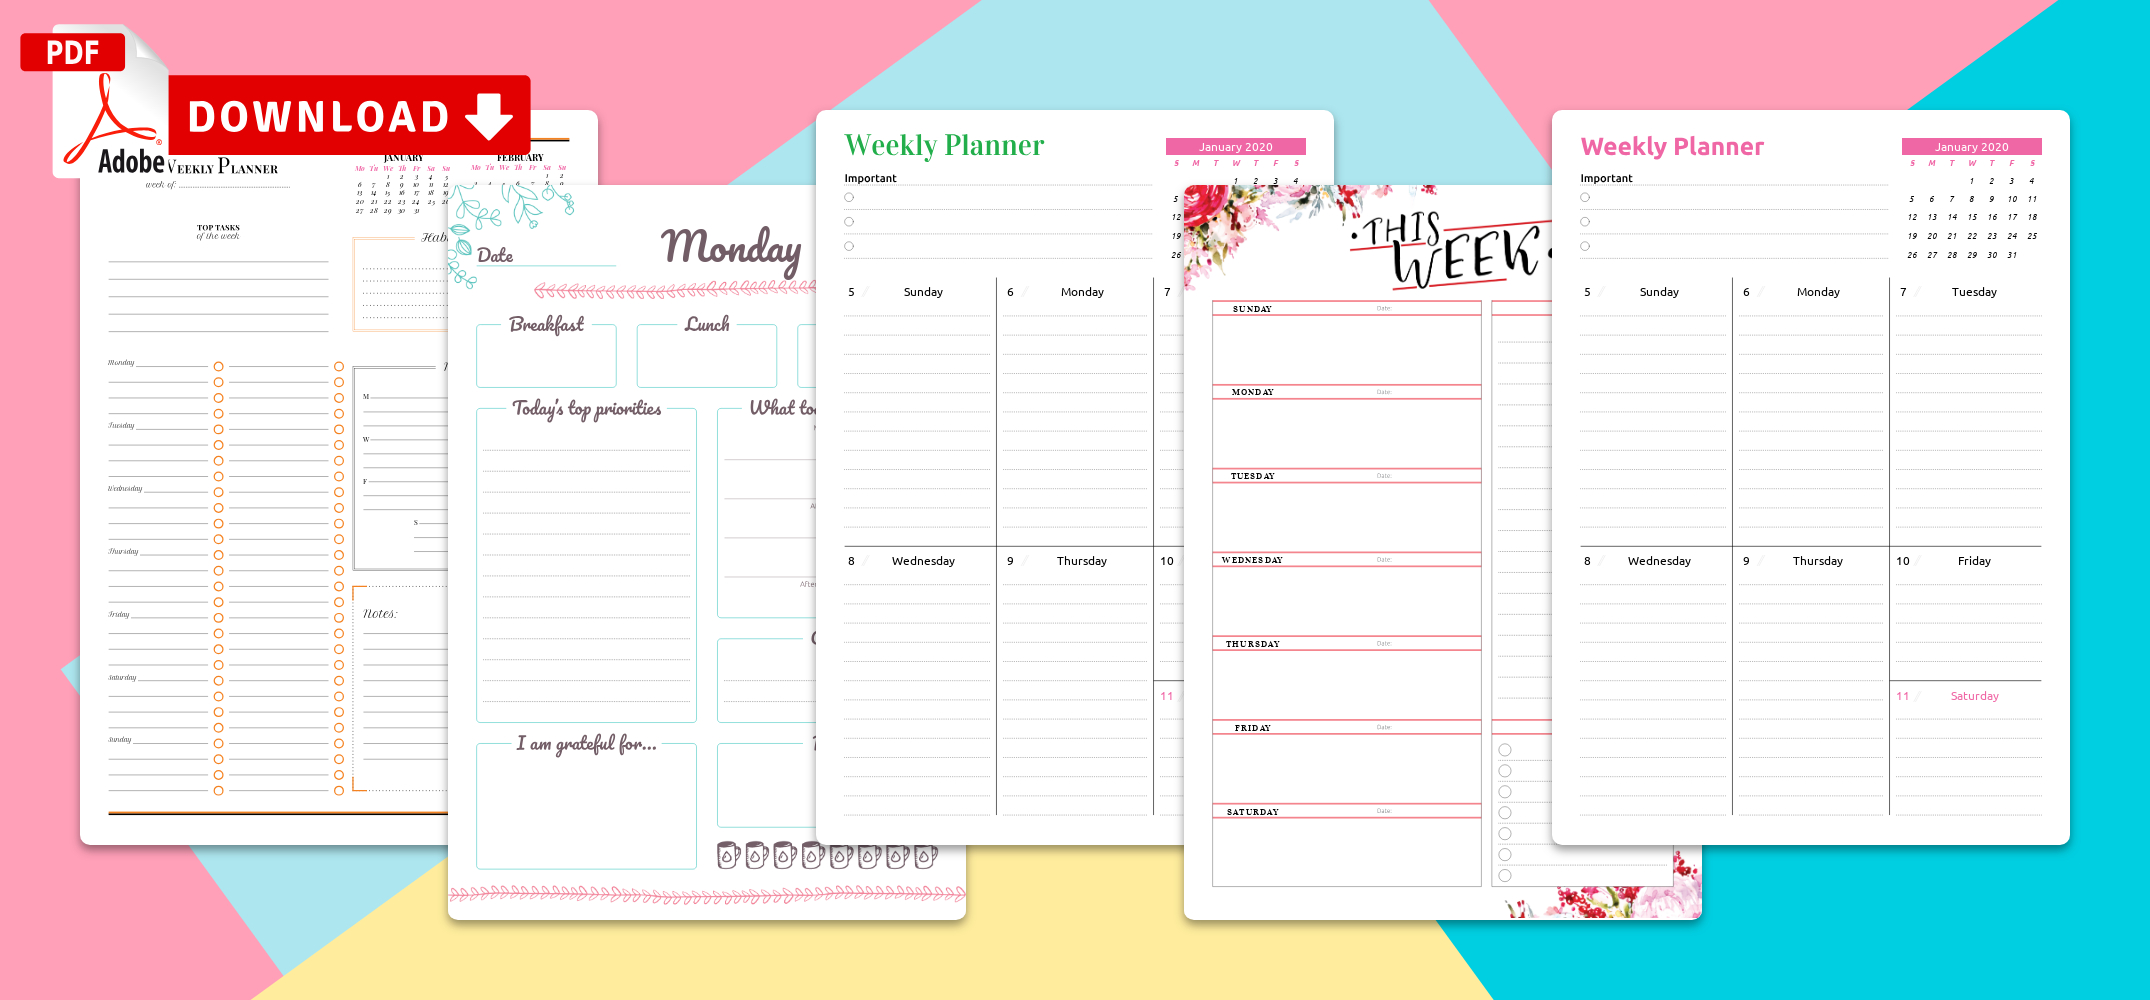 Printable Weekly Planner Templates - Download Pdf-Excel Hourly Template 2021